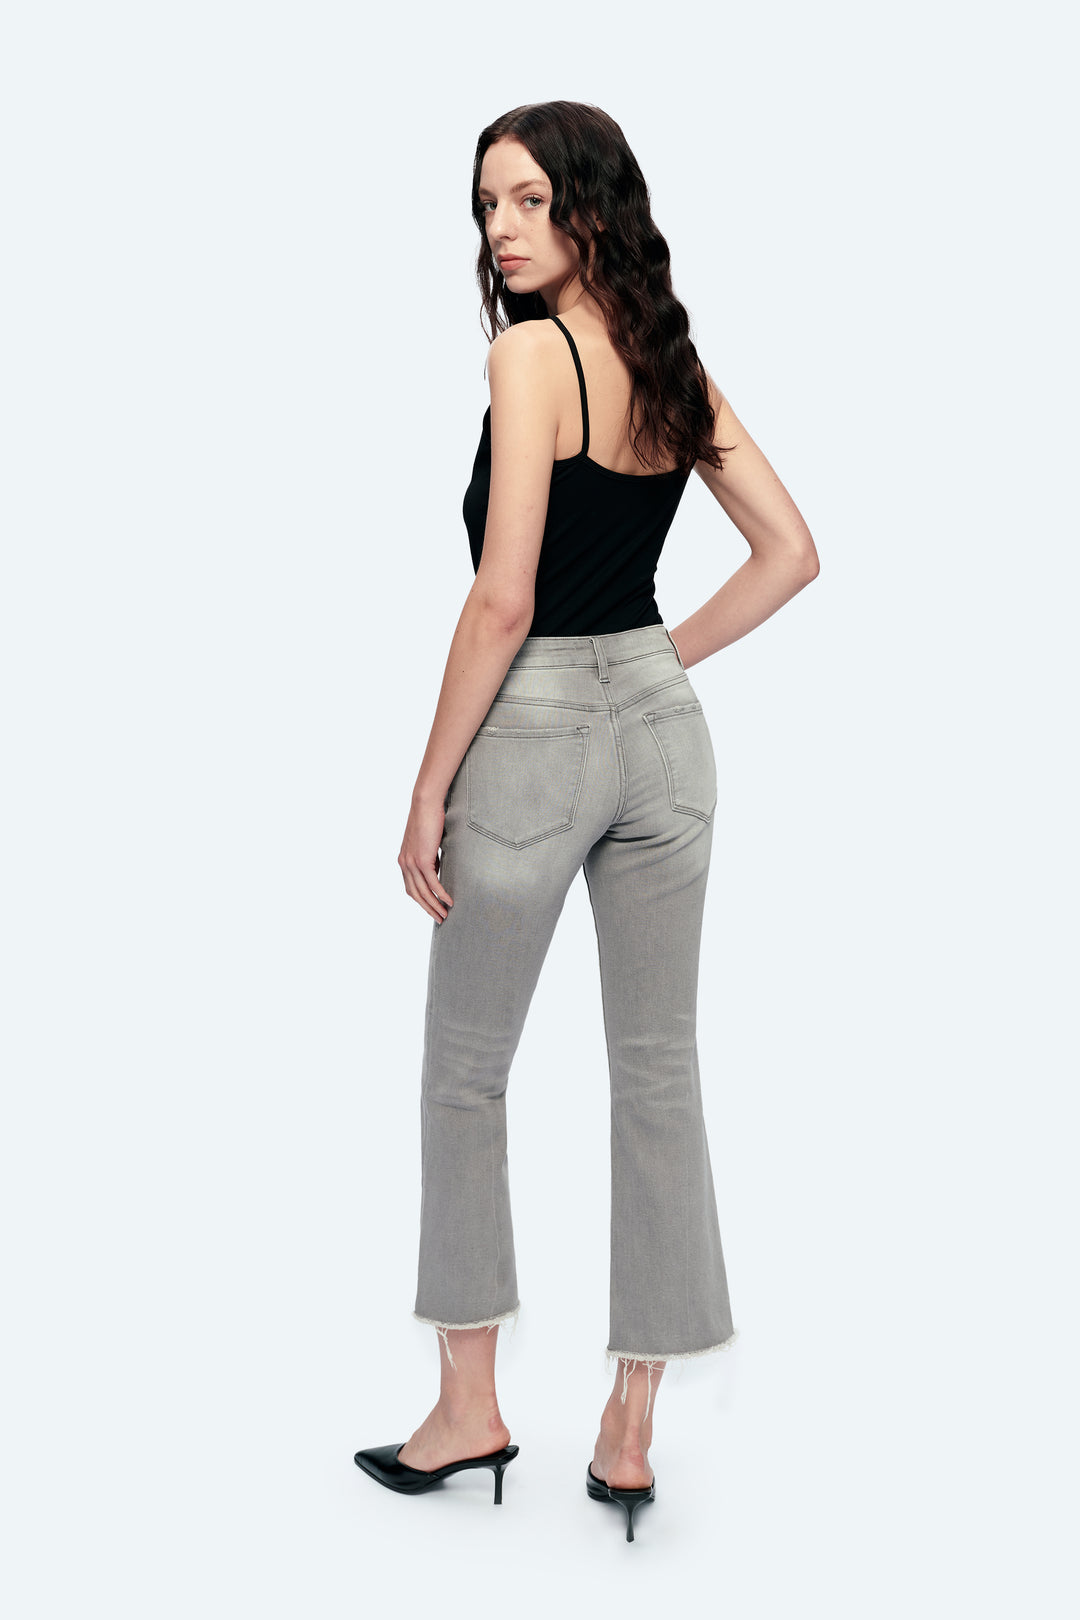 HIGH RISE STRAIGHT ANKLE DENIM JEANS WITH RAW EDGE